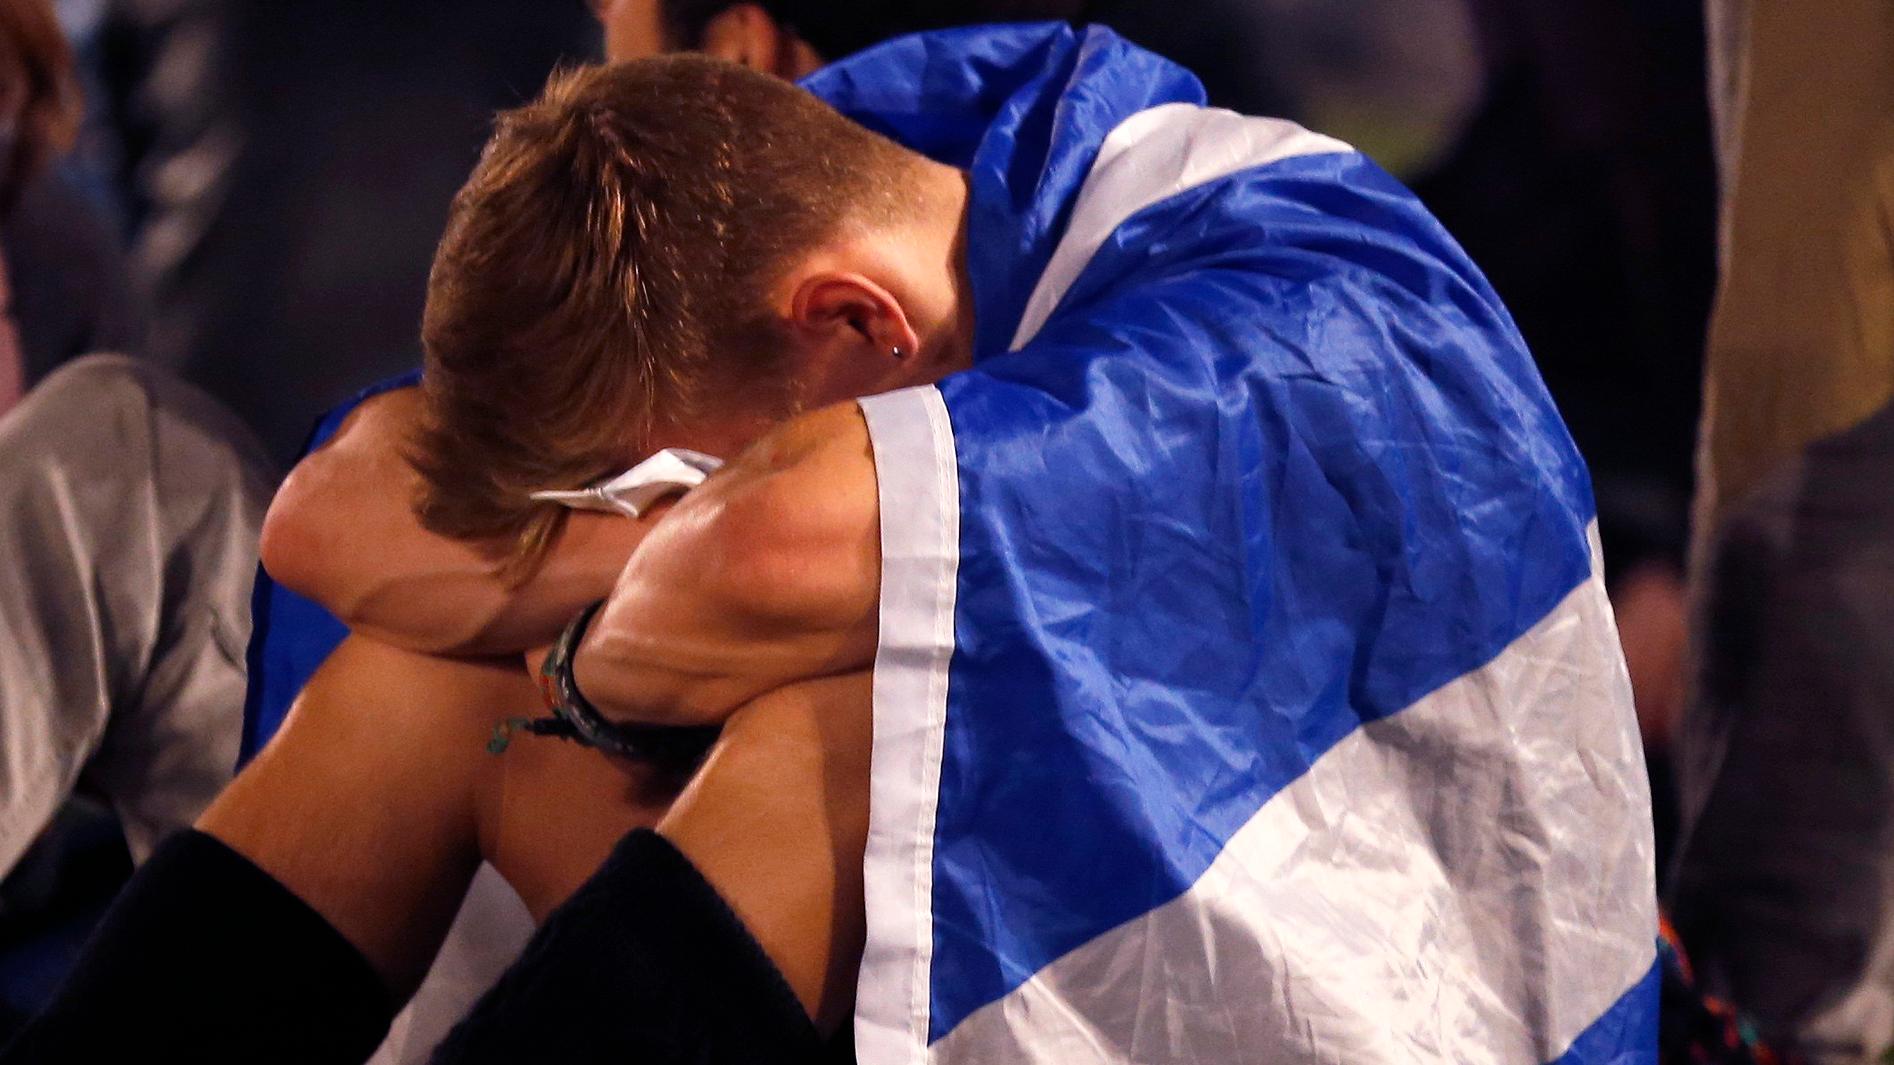 A supporter from the "Yes" Campaign cries into his knees as he sits in George Square in Glasgow, Scotland September 19, 2014. The "Yes" Campaign bid to win independence for Scotland, failed.